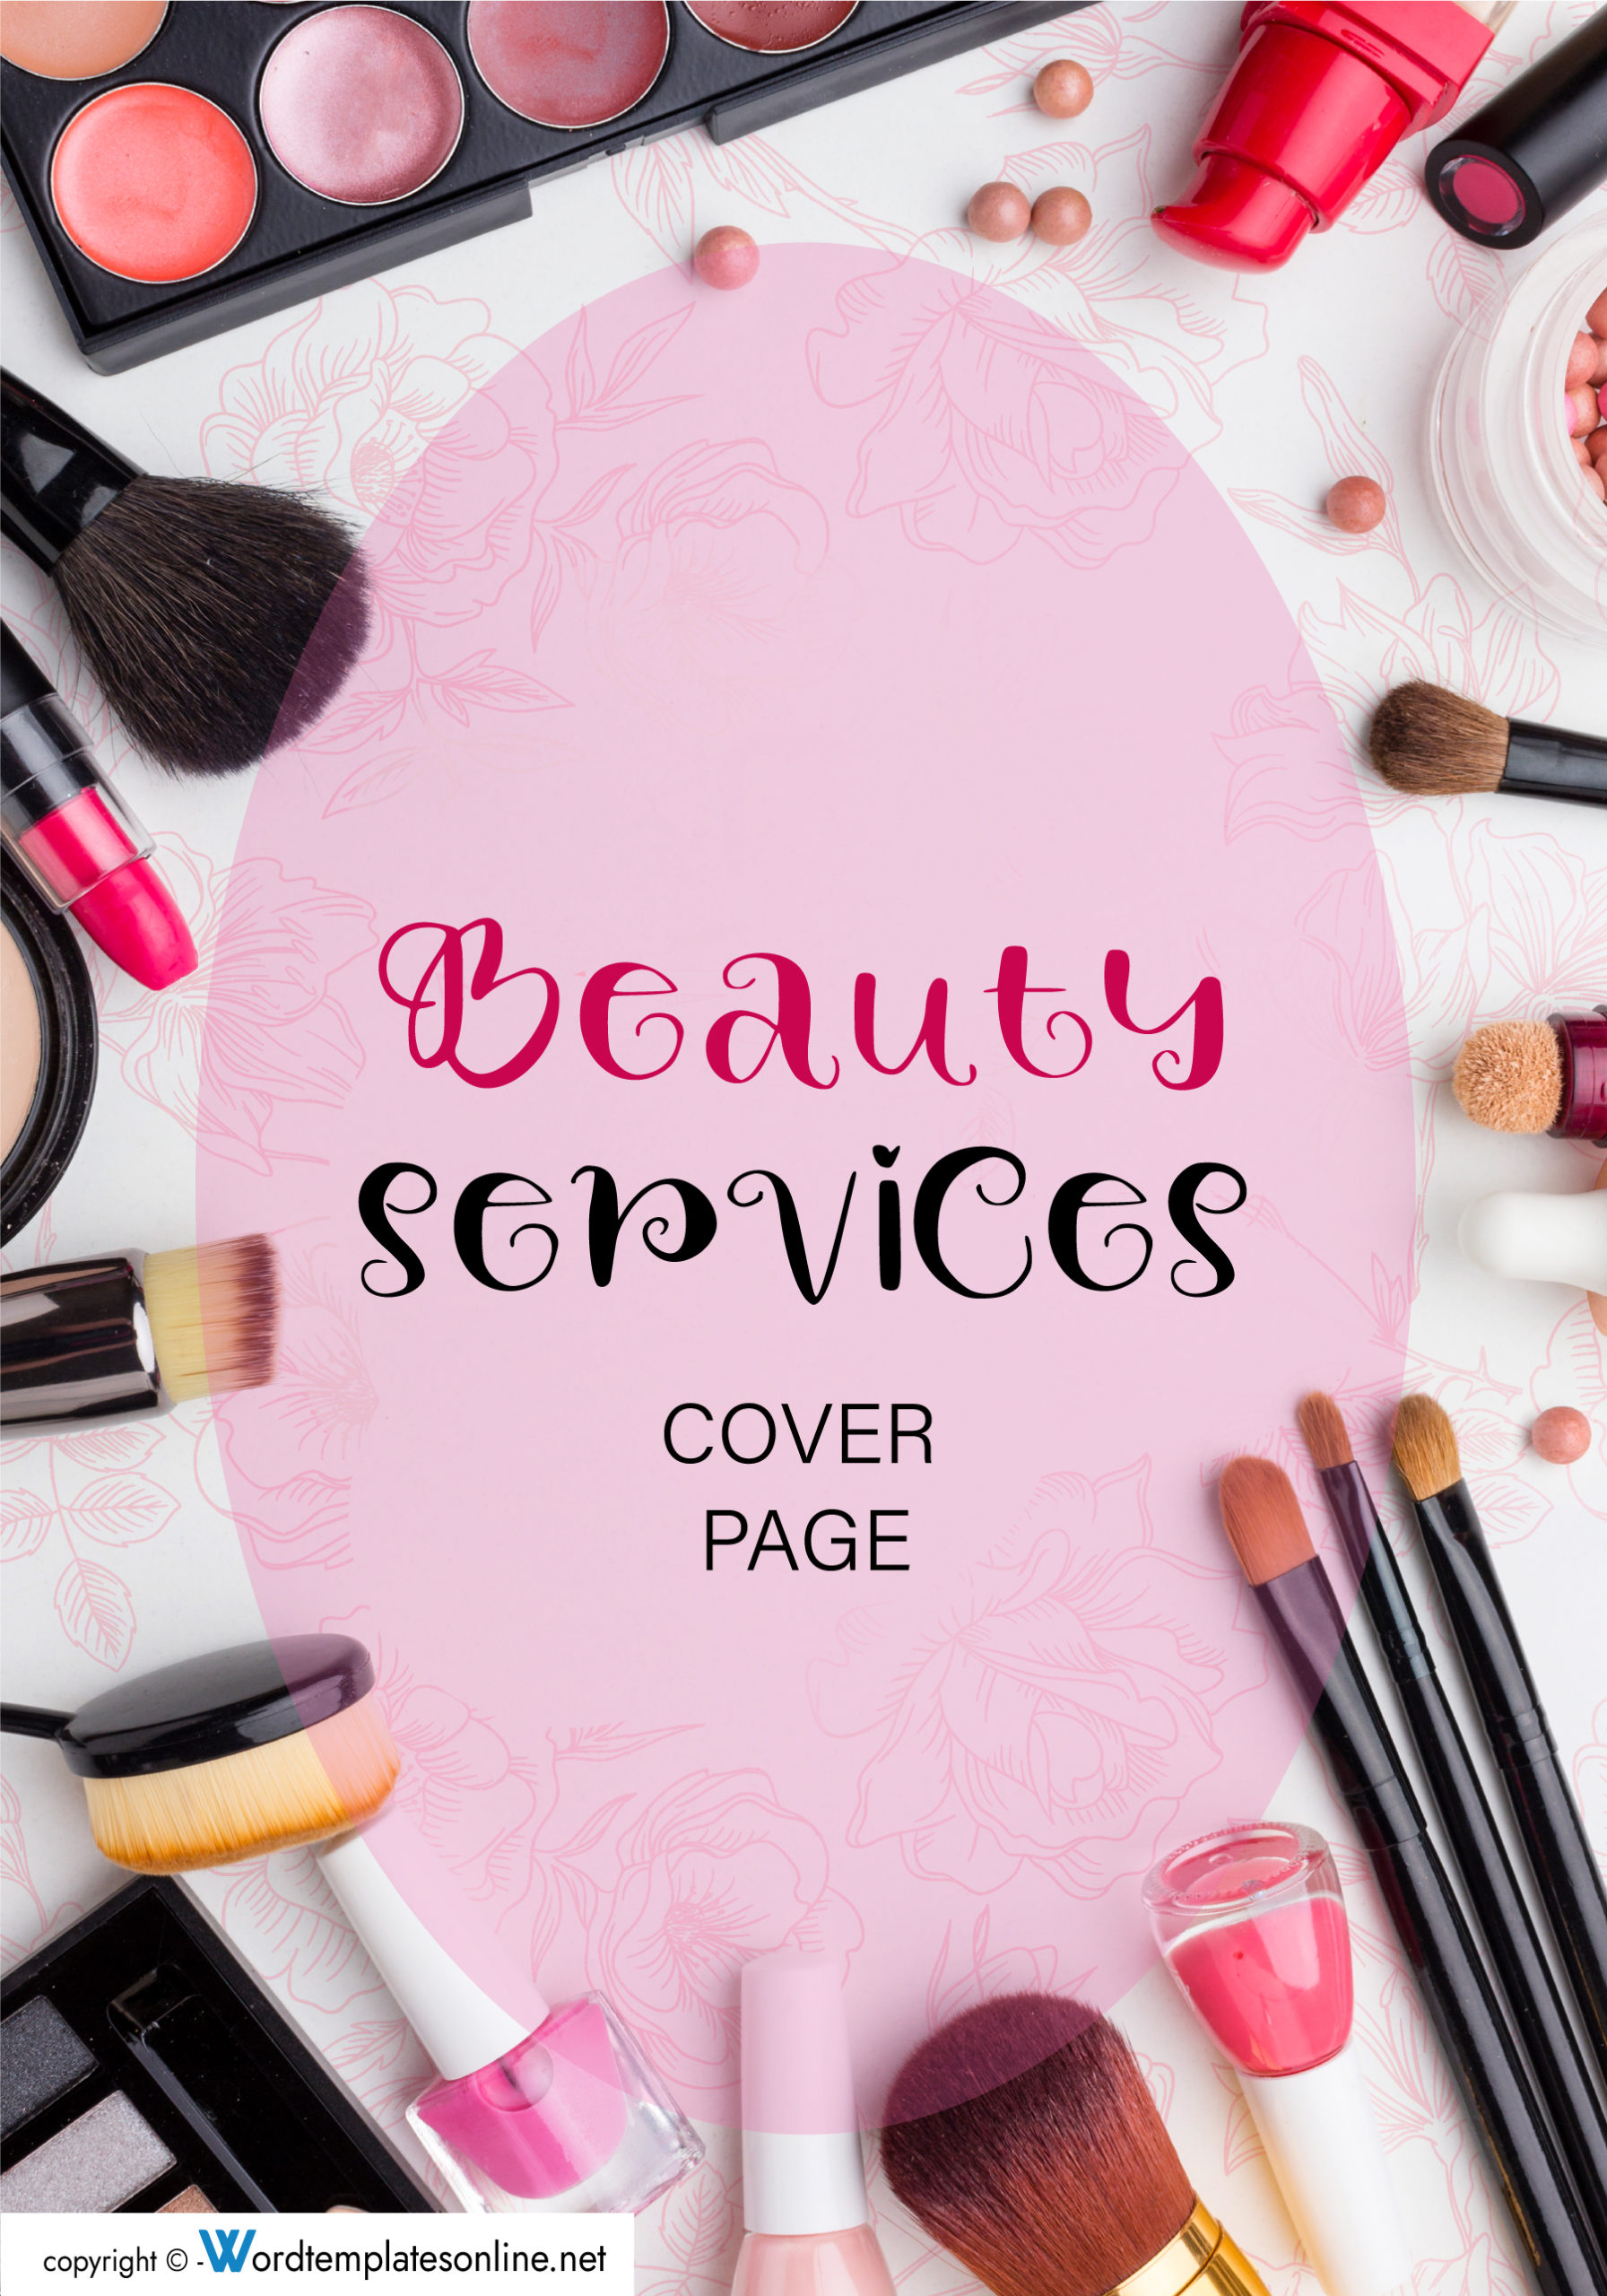 Printable Beauty Services Cover Page Sample - Customizable and Professional